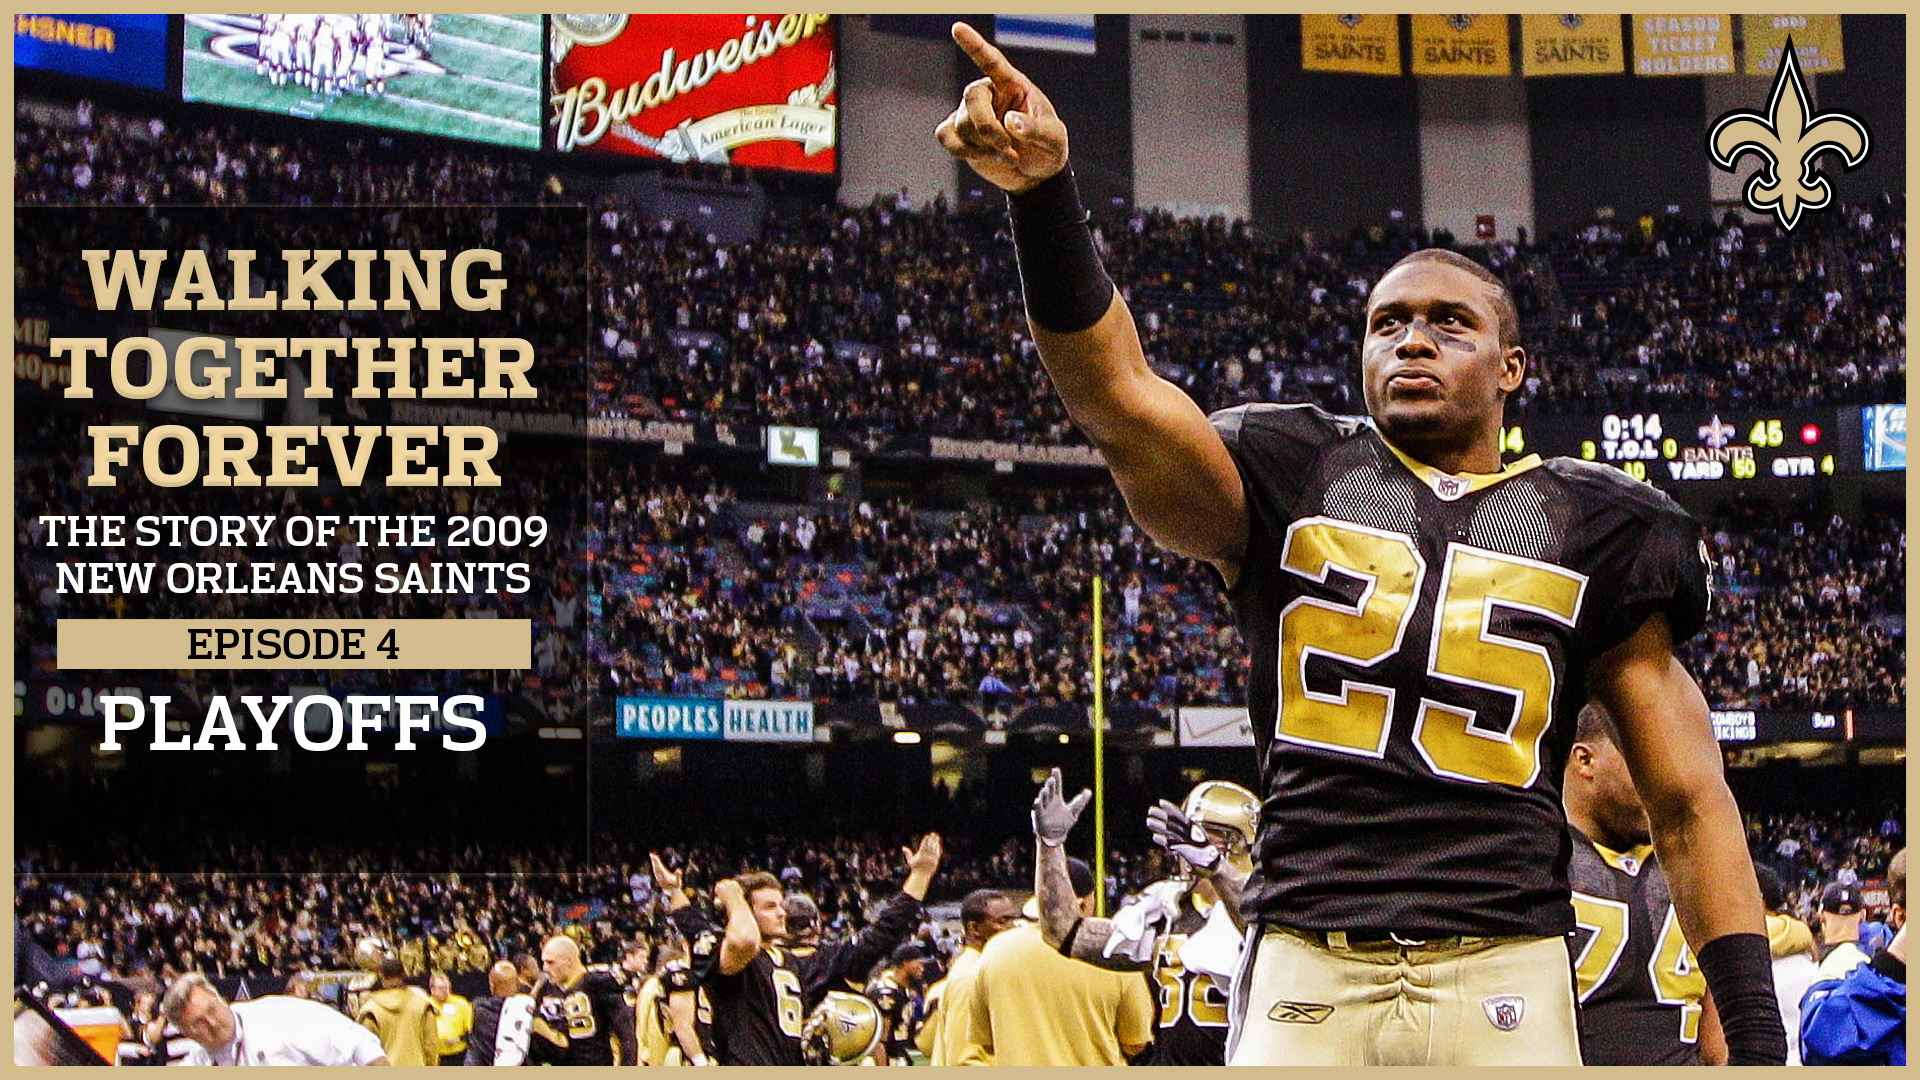 New Orleans Saints on X: 'Episode 4 of Walking Together Forever, the story  of the 2009 New Orleans #Saints, explores the end of the 2009 regular  season and the start of the